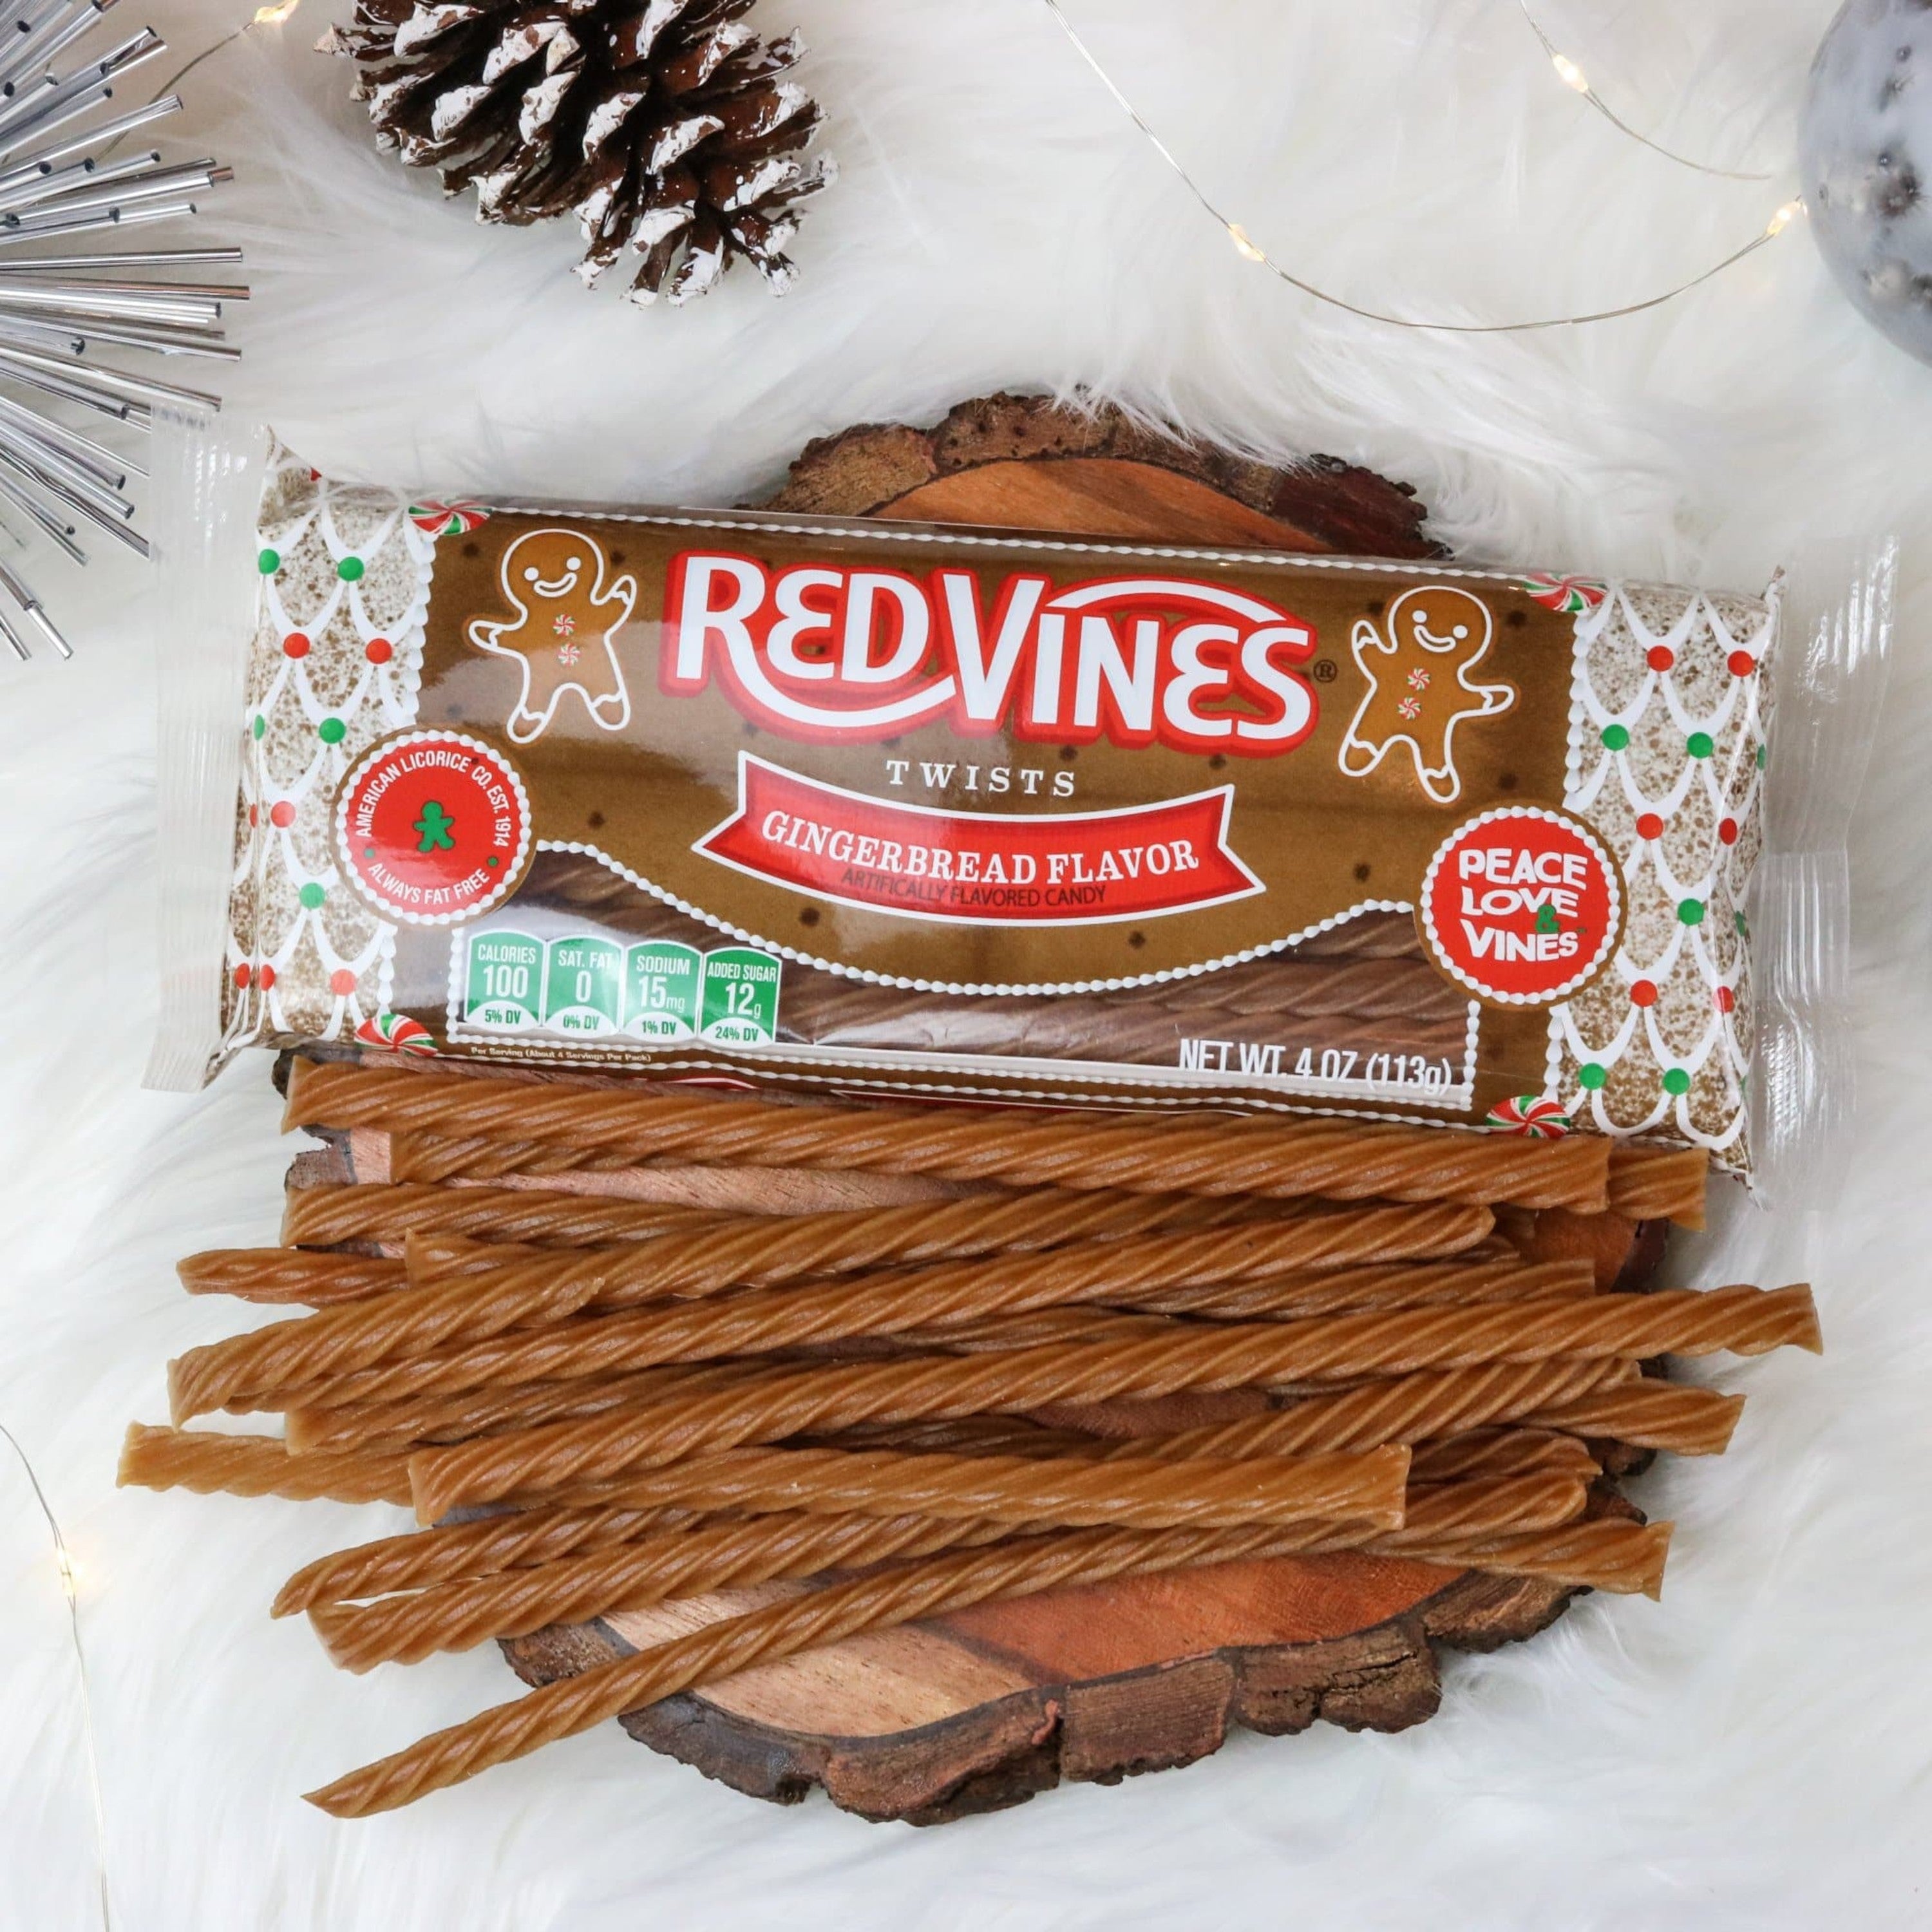 RED VINES Gingerbread flavored licorice twists - front of festive tray